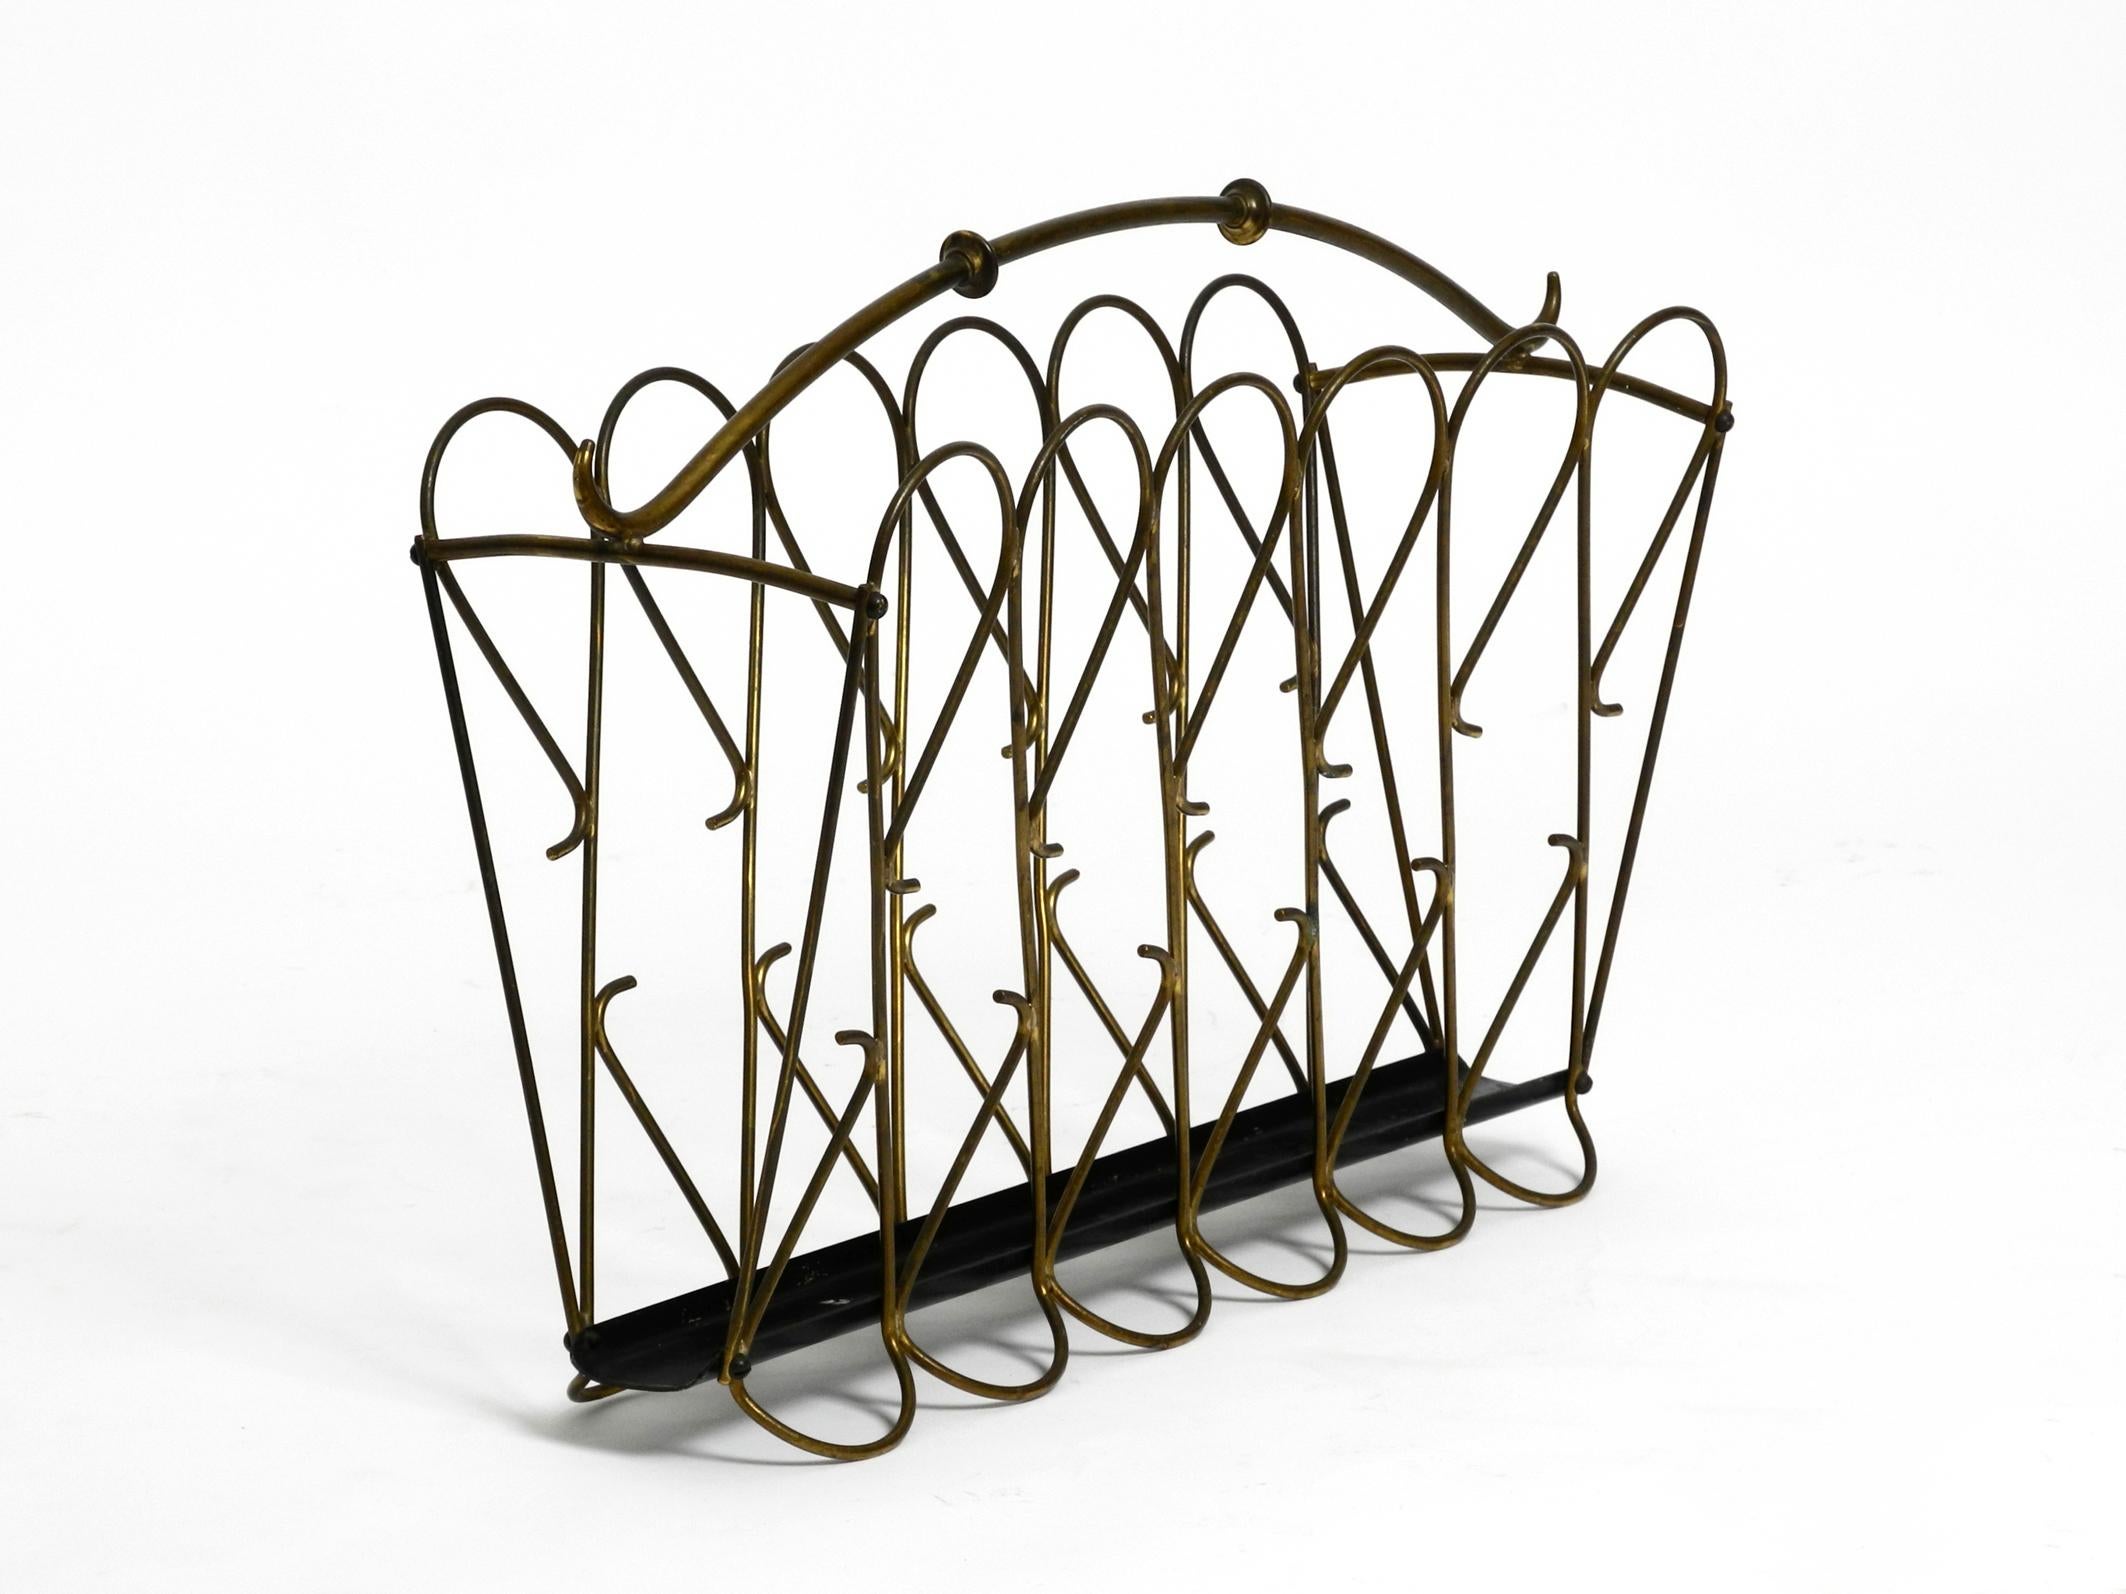 Extraordinary beautiful original Italian Mid-Century Modern darker gone
brass newspaper or magazine rack.
Very high quality, interesting 1950s design.
In a very good vintage condition with a great patina. No damage, not wobbly or bent.
100%